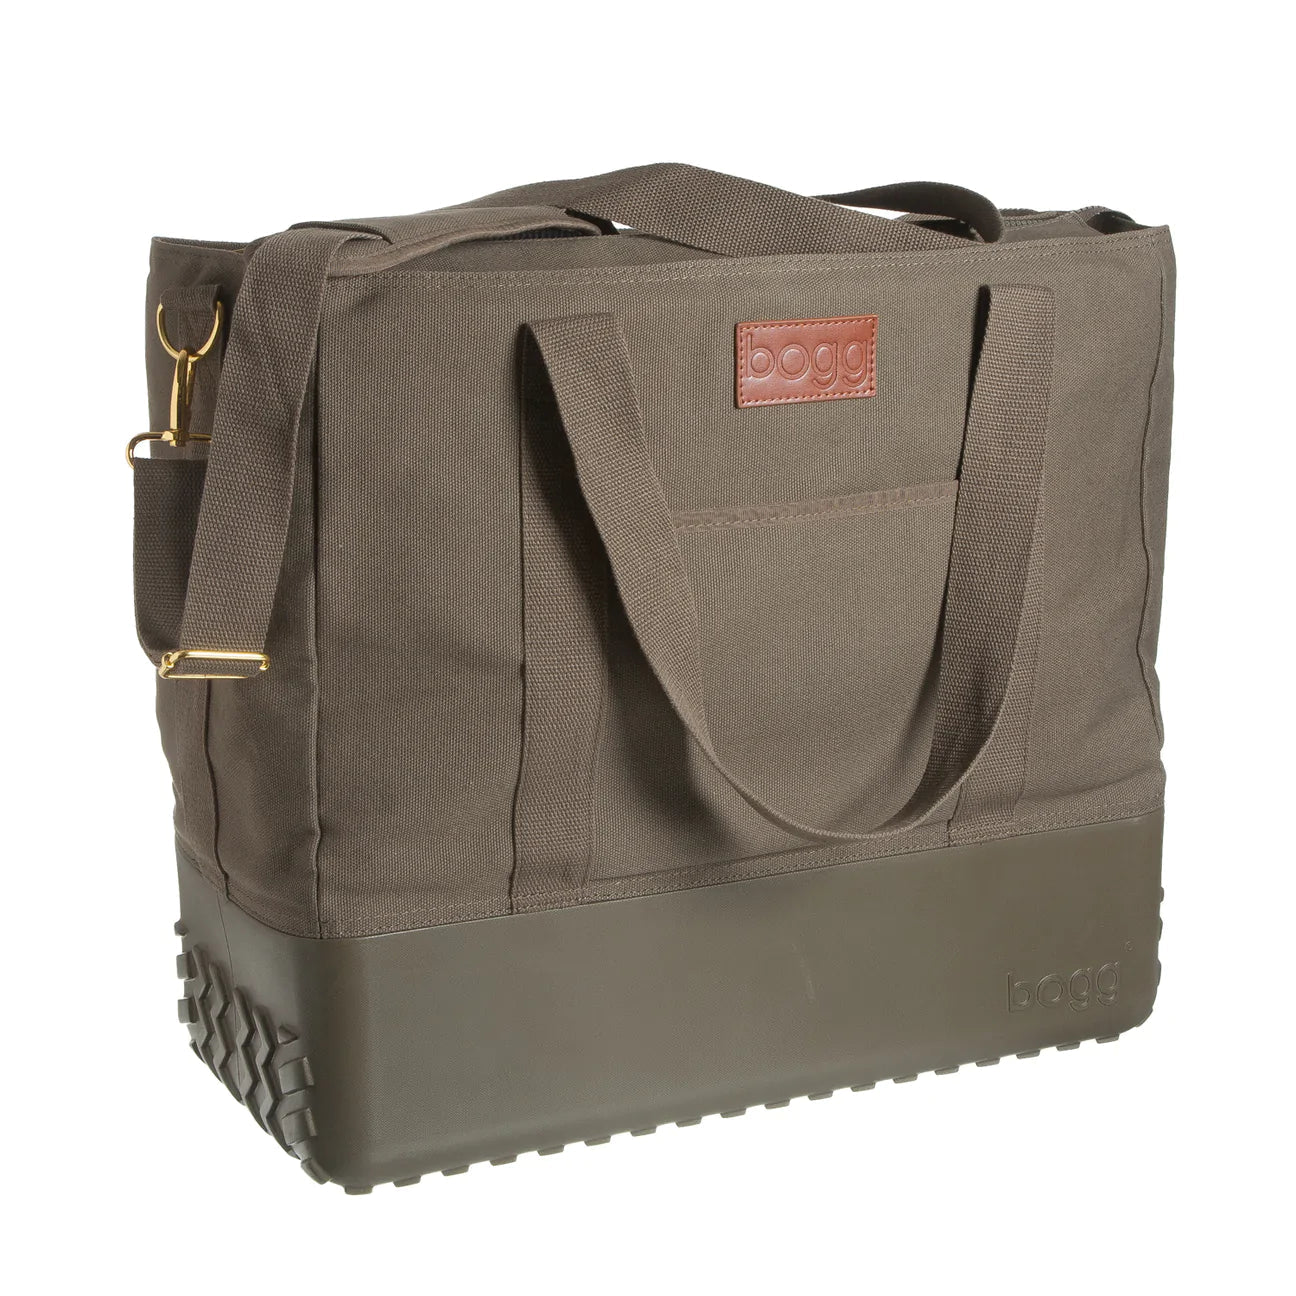 BOGG Canvas Collection Tote Gift Olive  